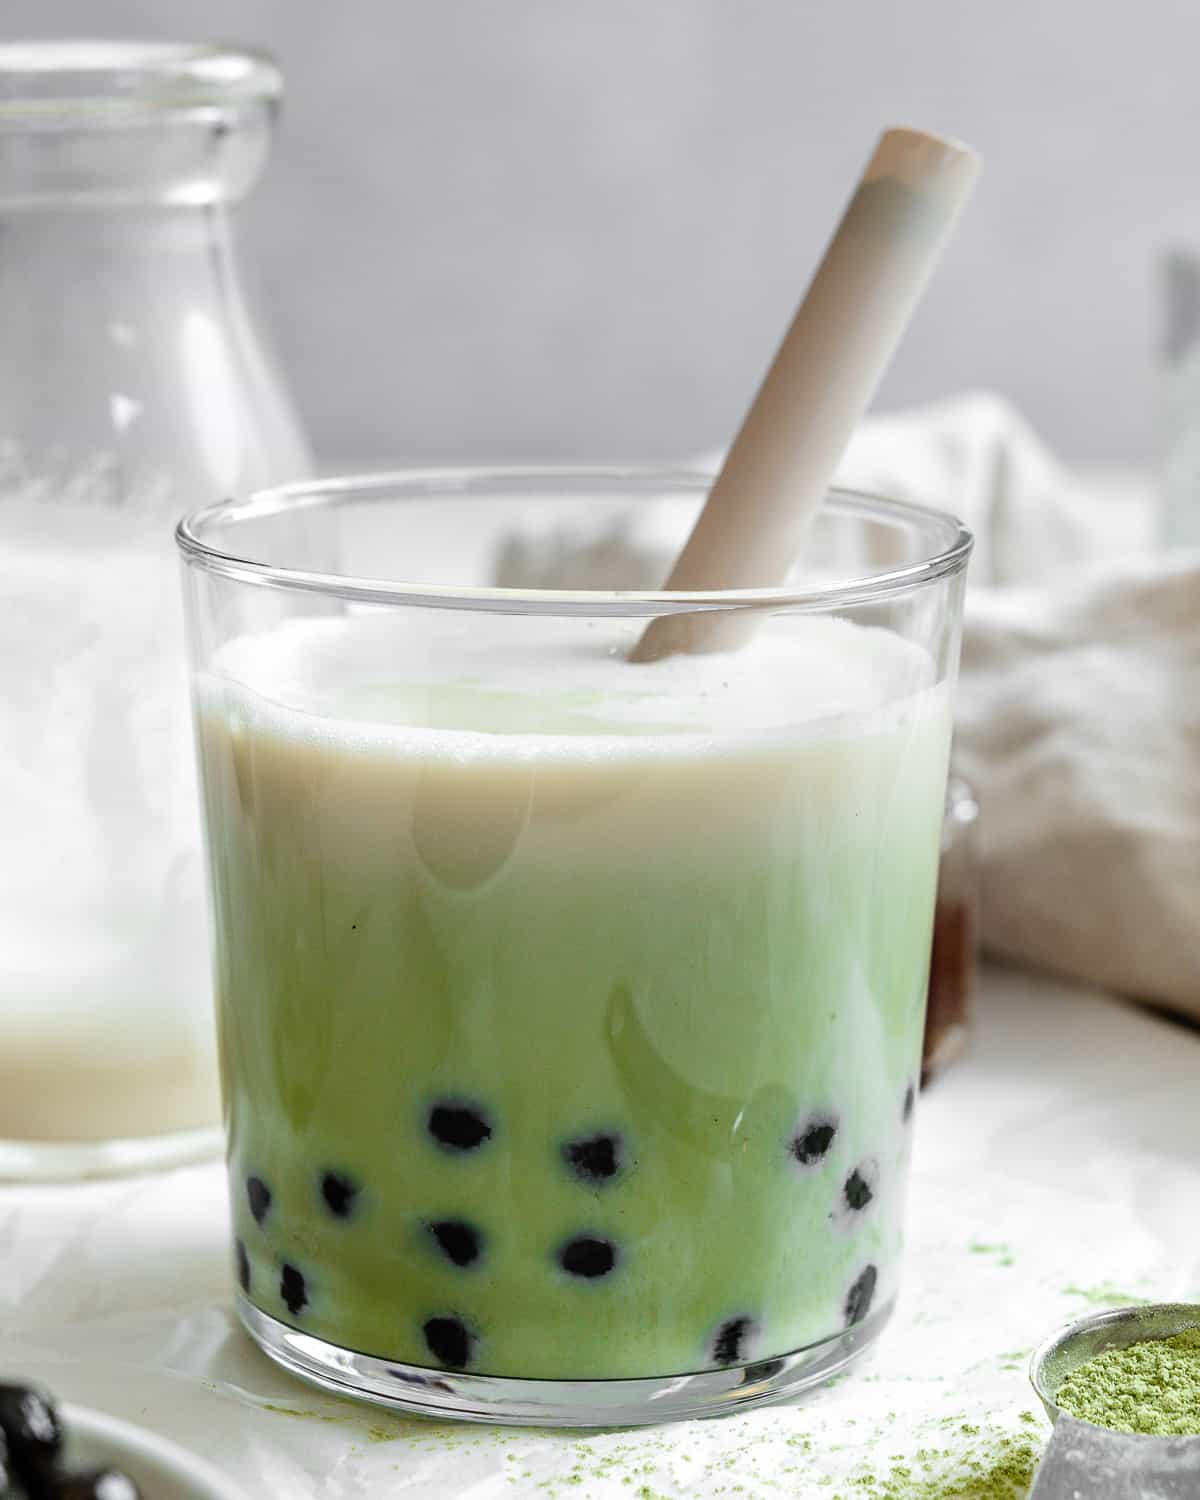 completed Matcha Boba Tea (Green Milk Tea) in a glass against a light background